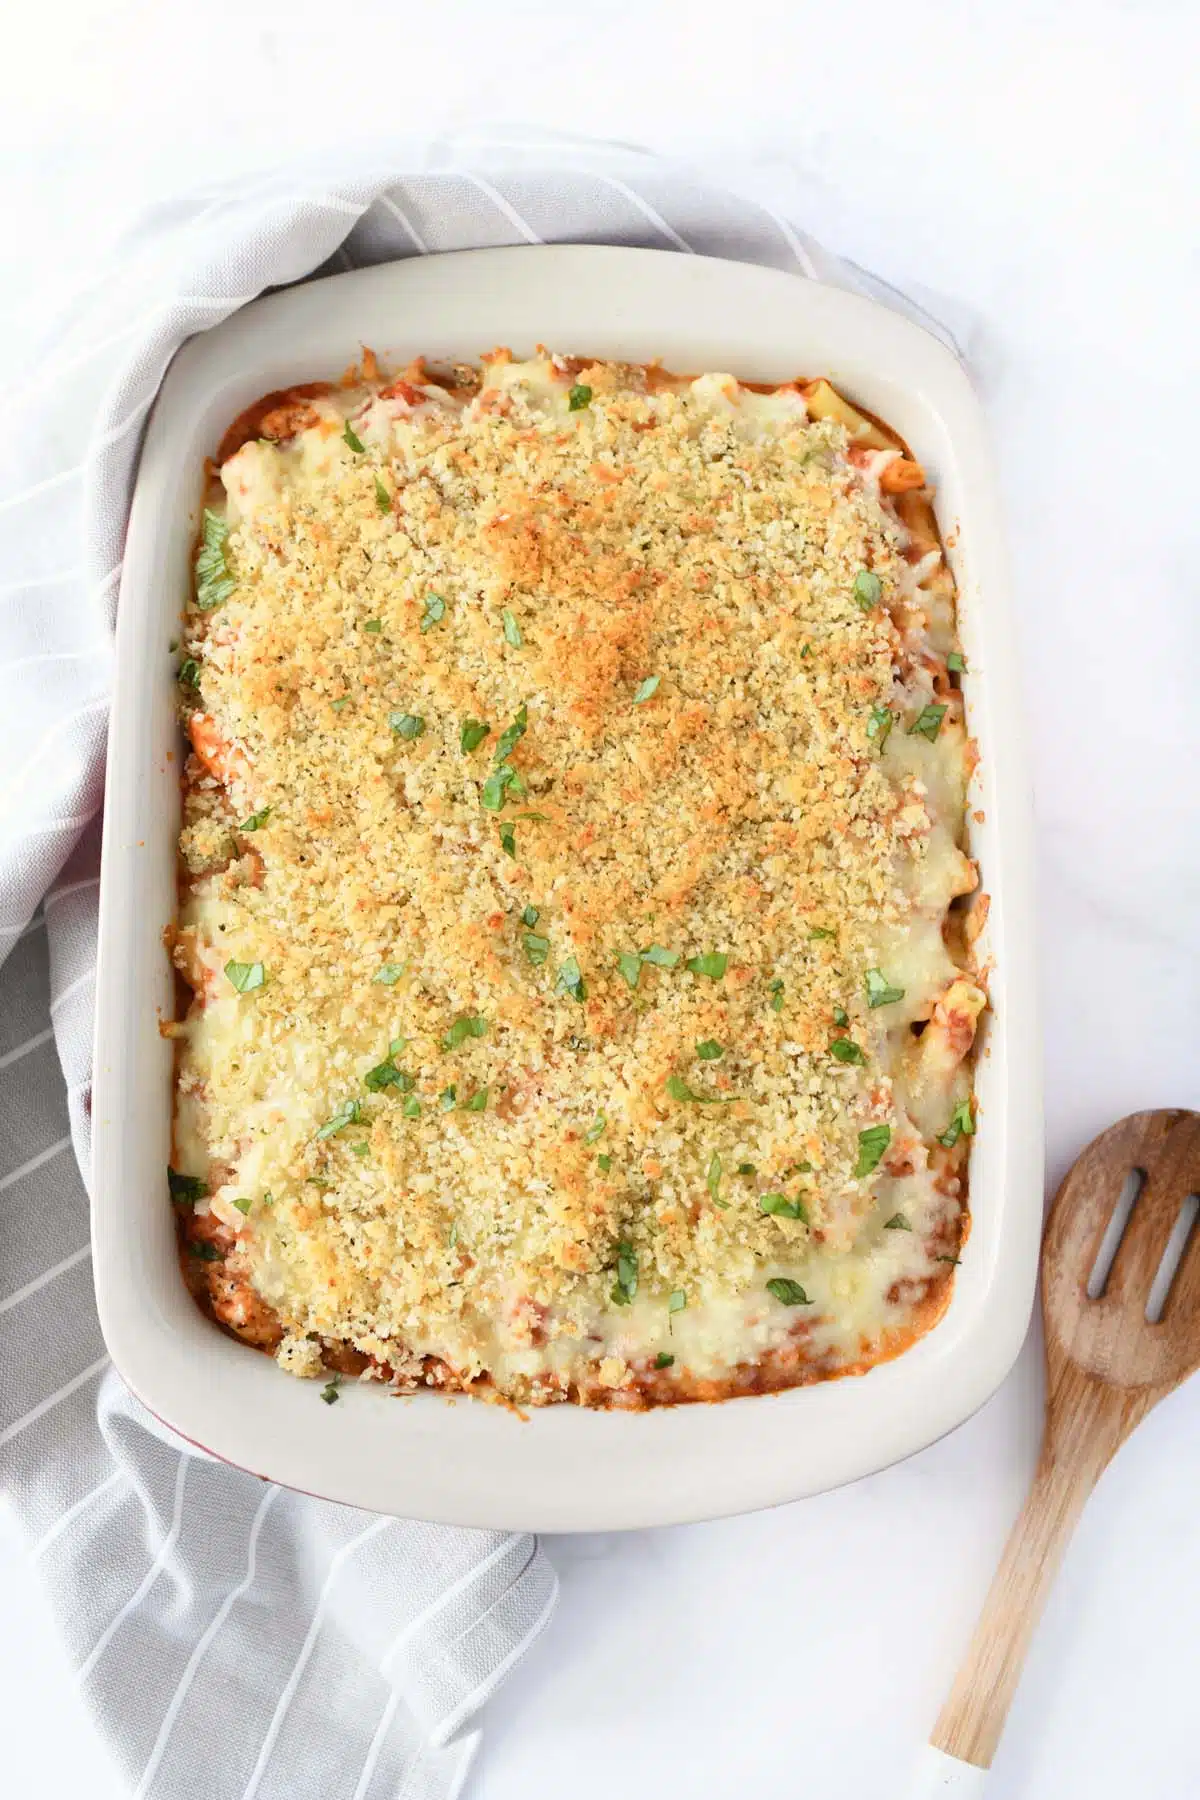 A golden-brown, baked chicken parmesan casserole with.